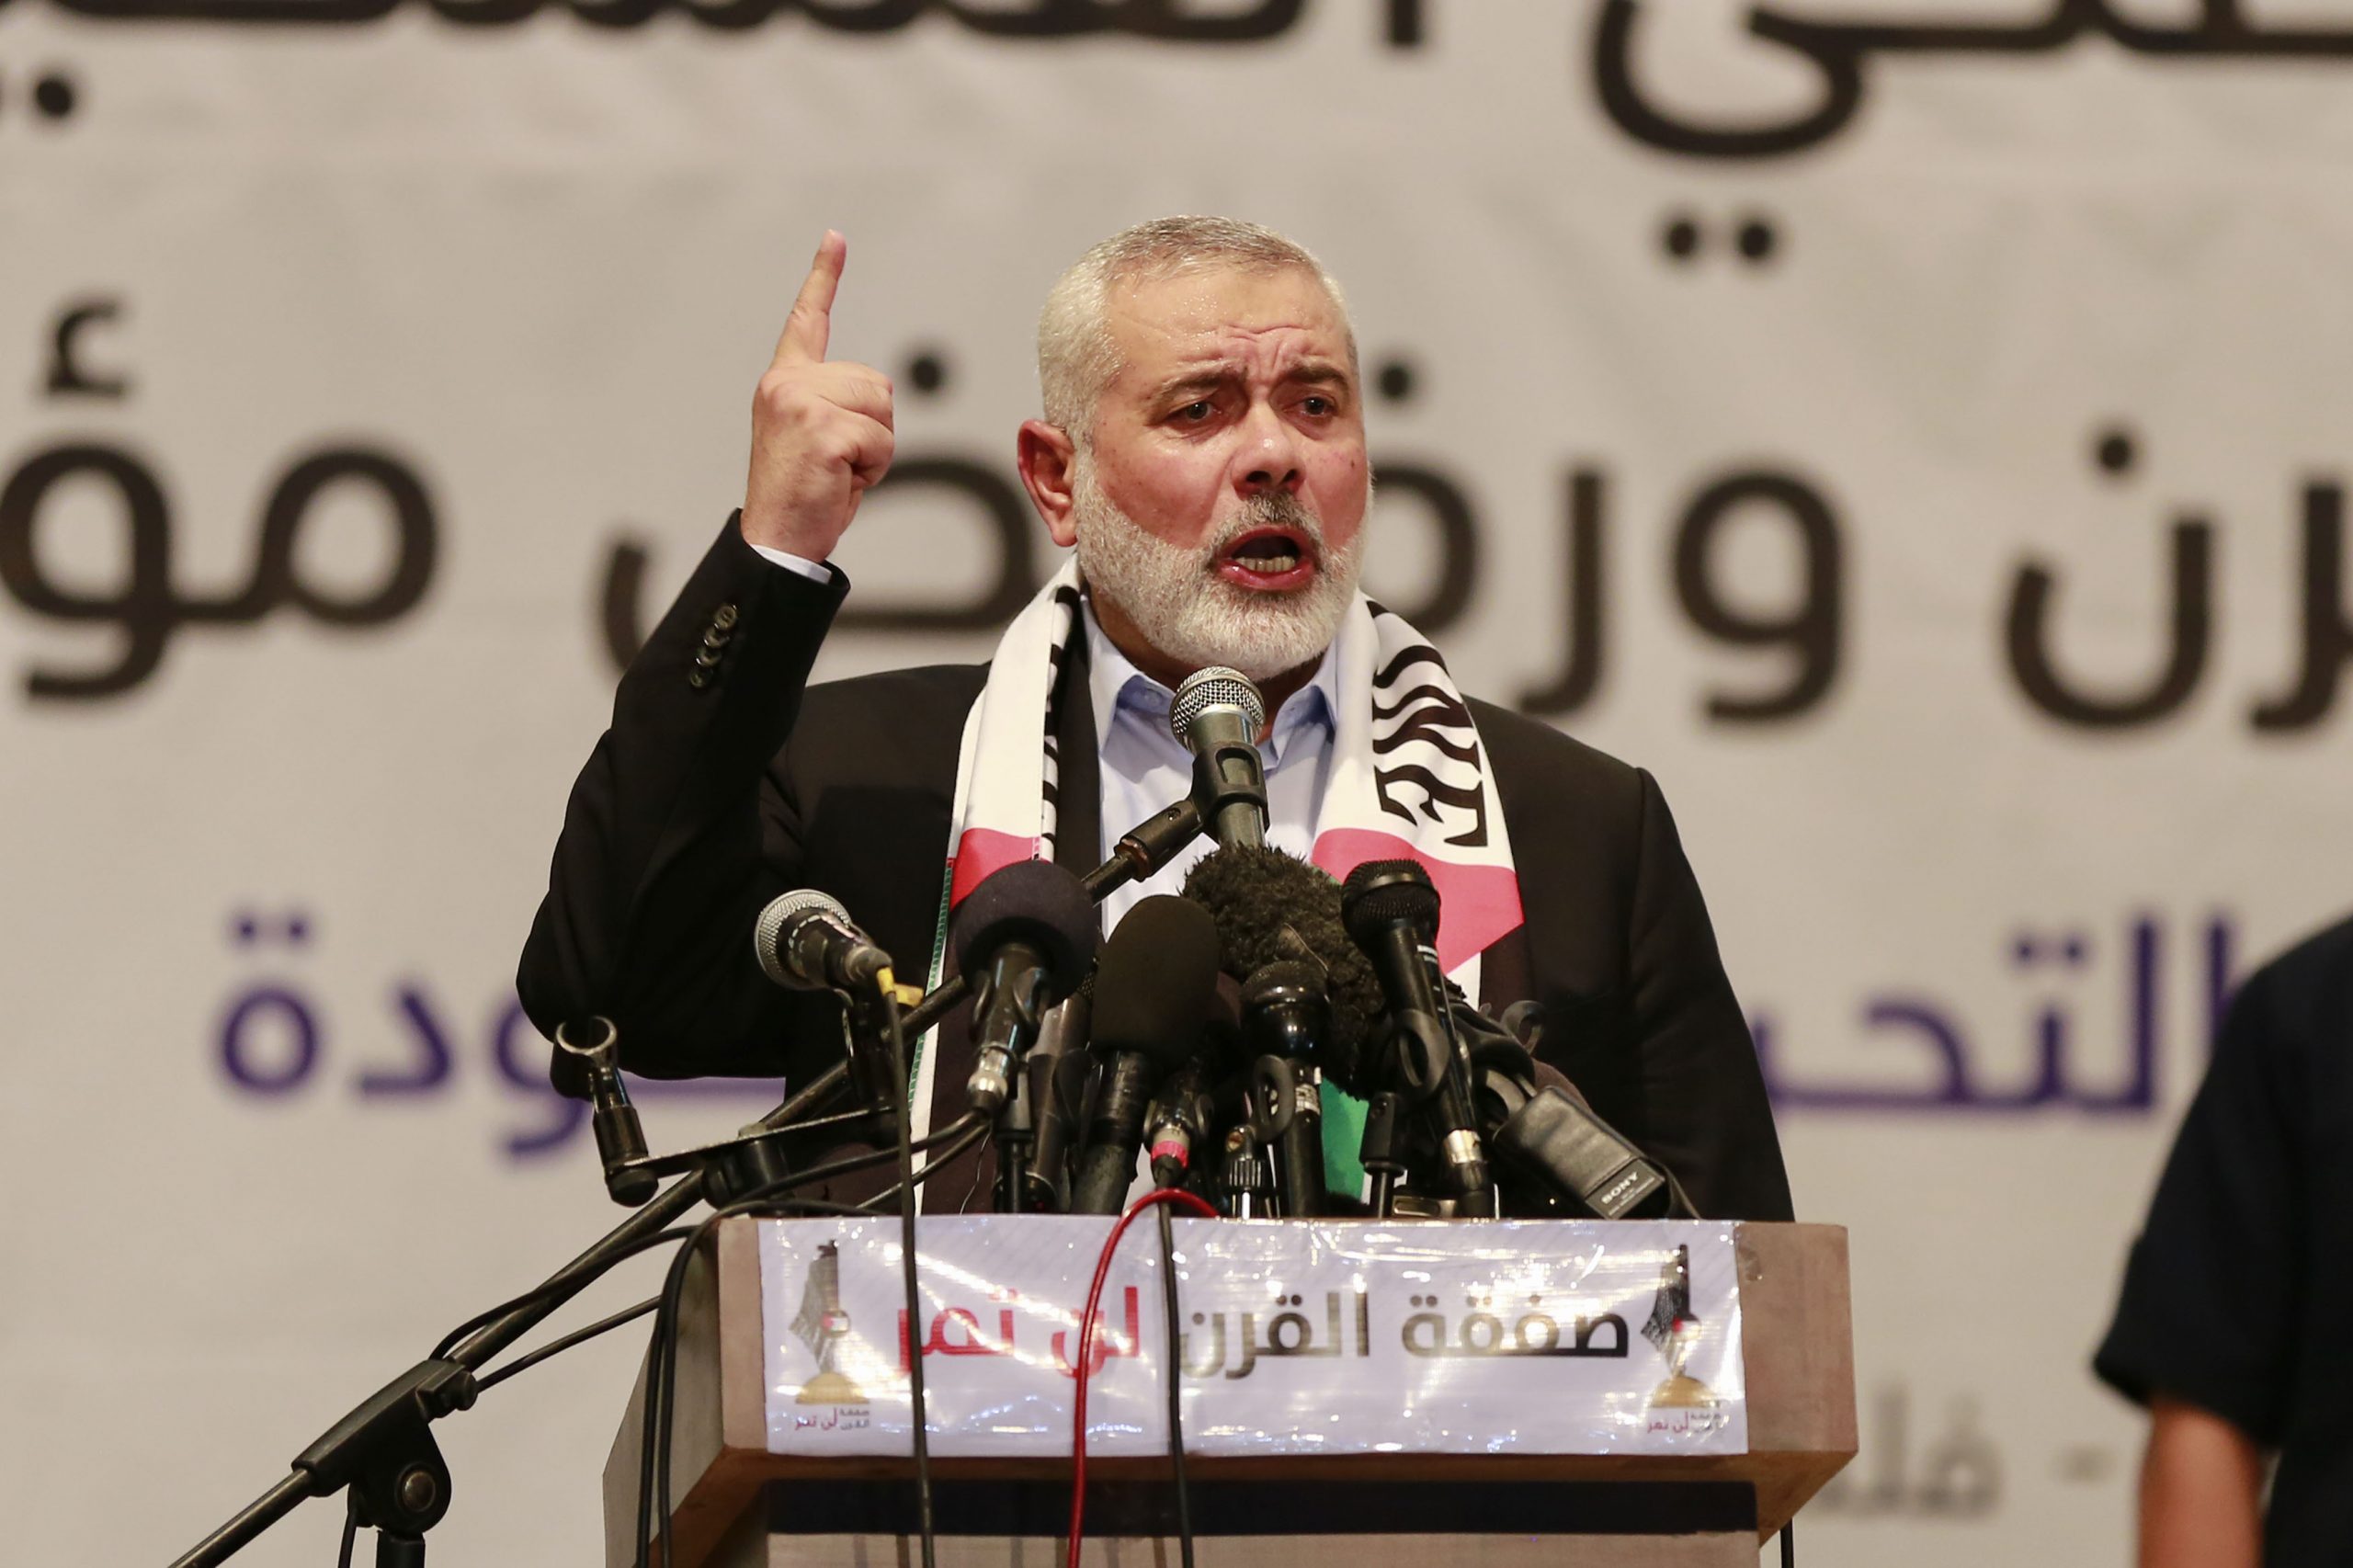 Prior to launching some 4,000 missiles against Israel with no provocation and true to his word, Gaza Palestinian dictator Ismail Haniya said “we shall never, never, never recognize Israel . . . They will never get anything but death and killing.”